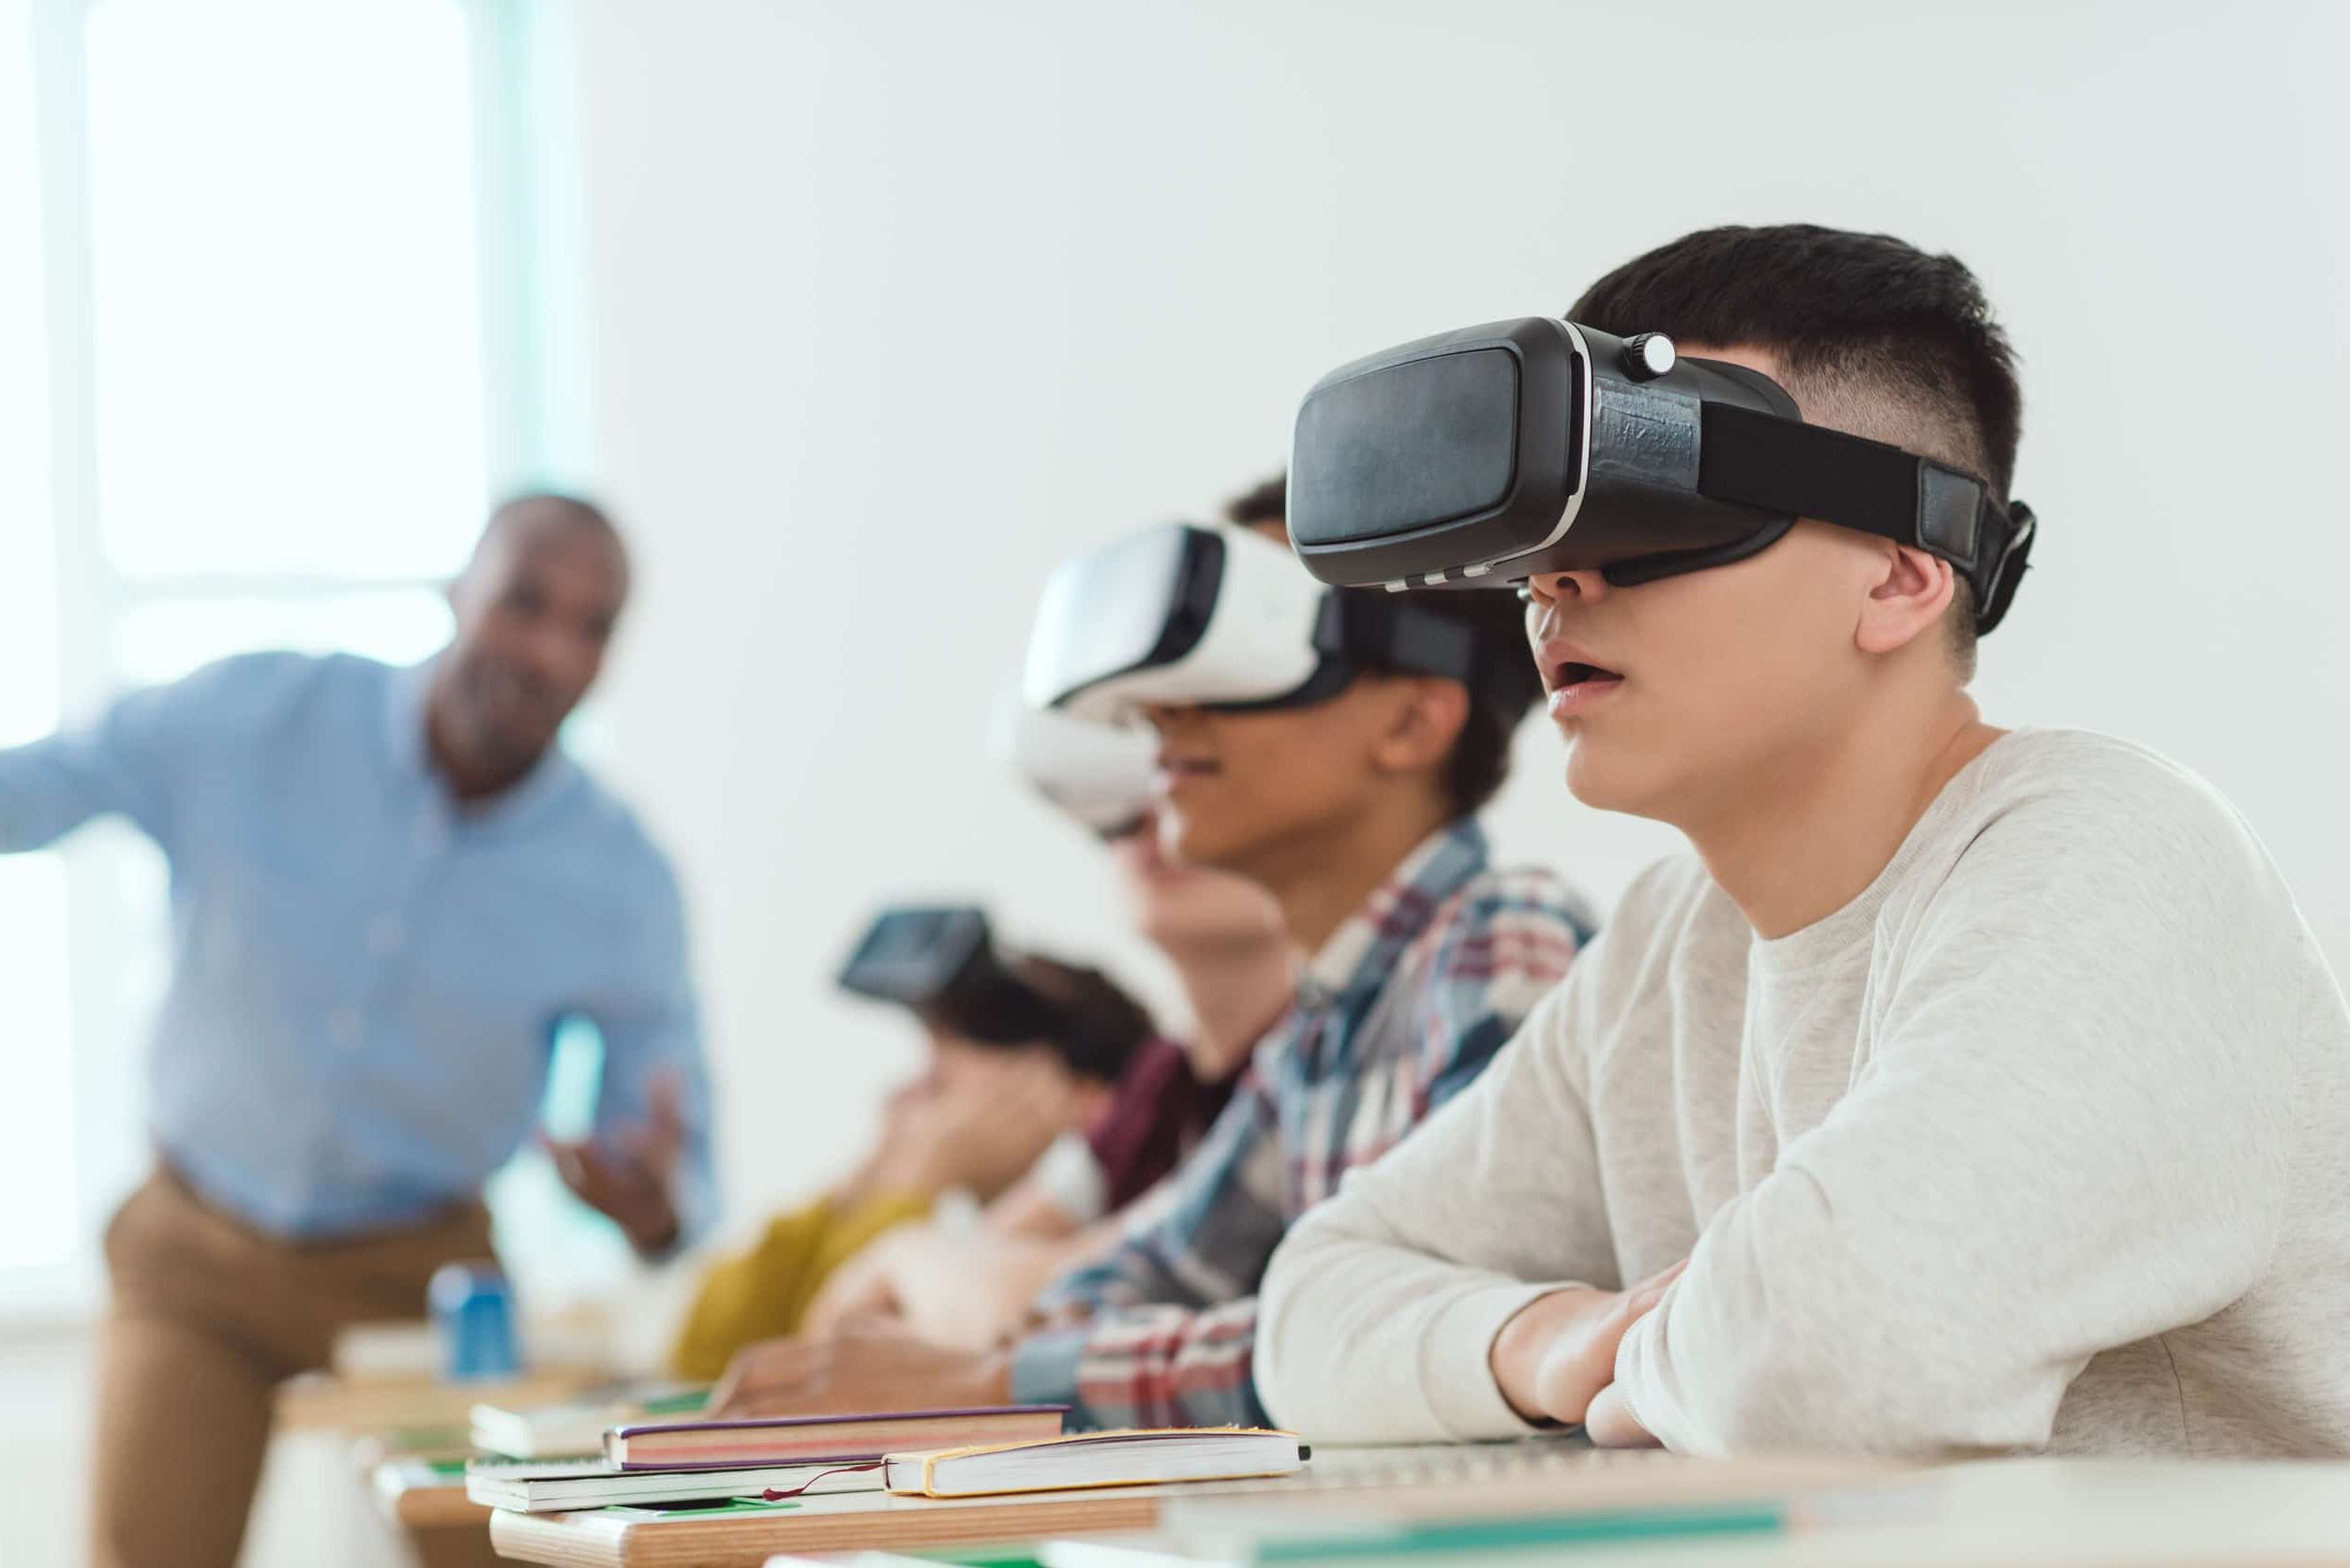 Young people using VR goggles in a classroom